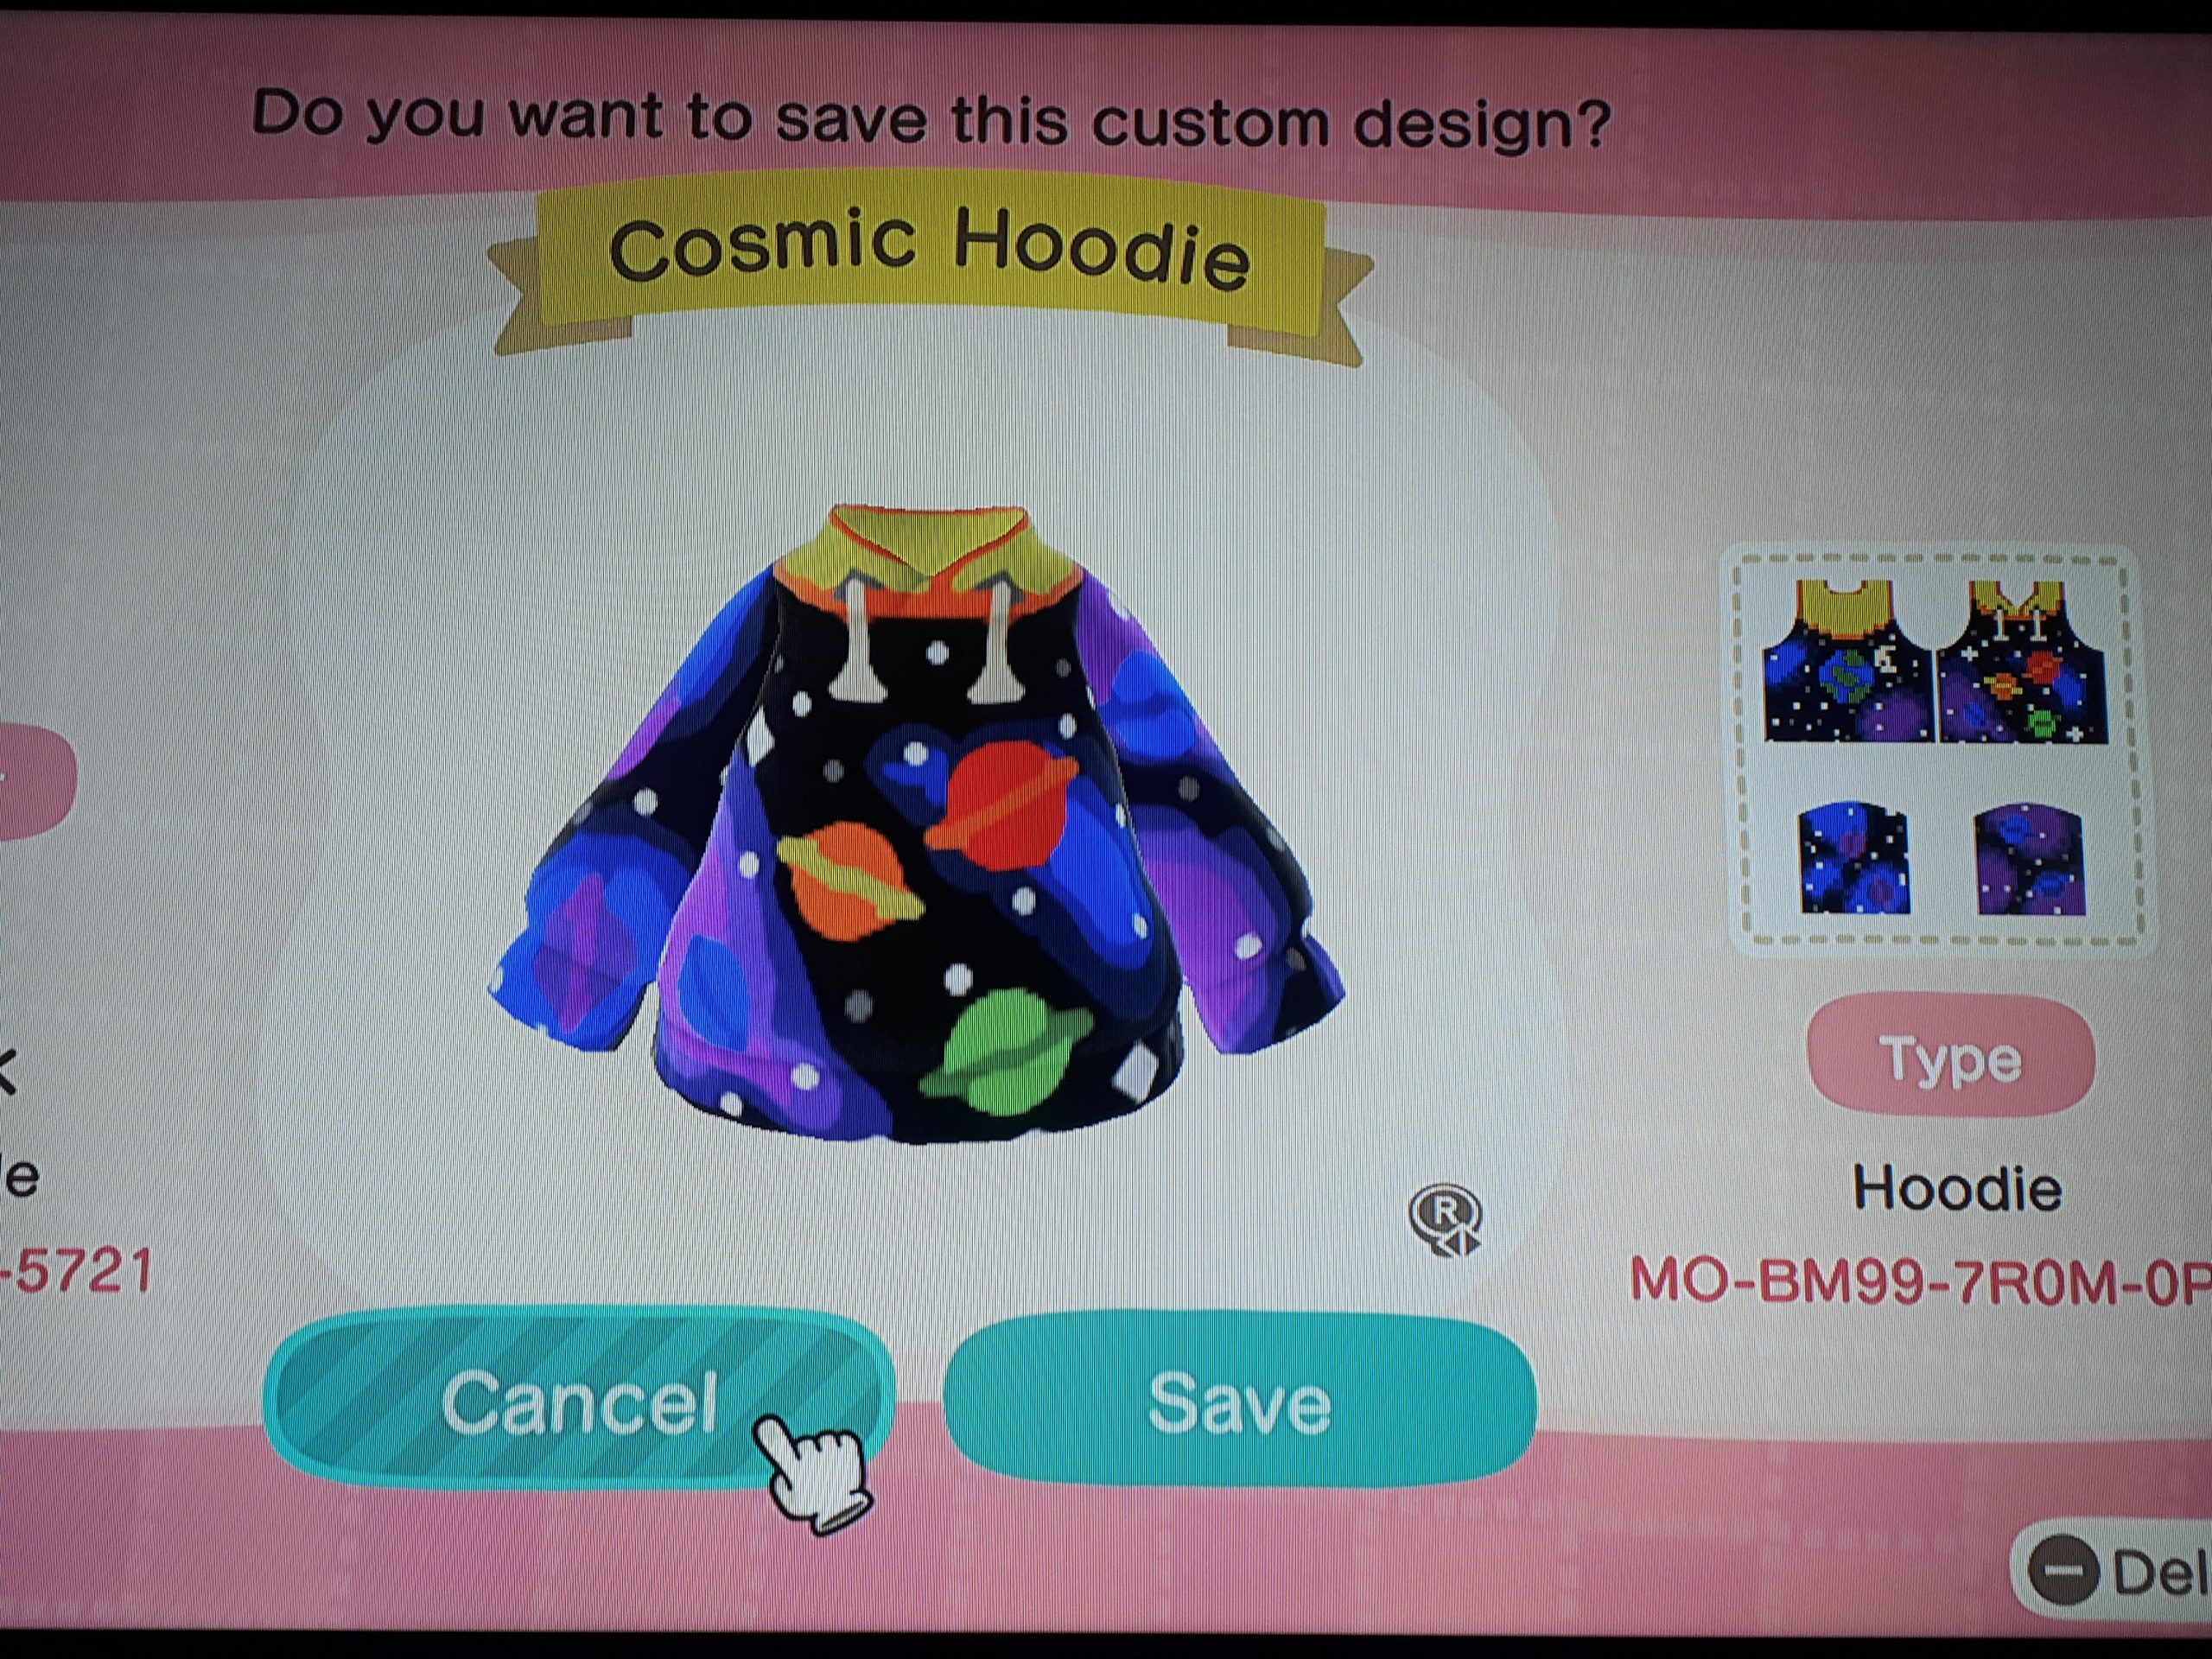 A cosmic hoodie pro design I made